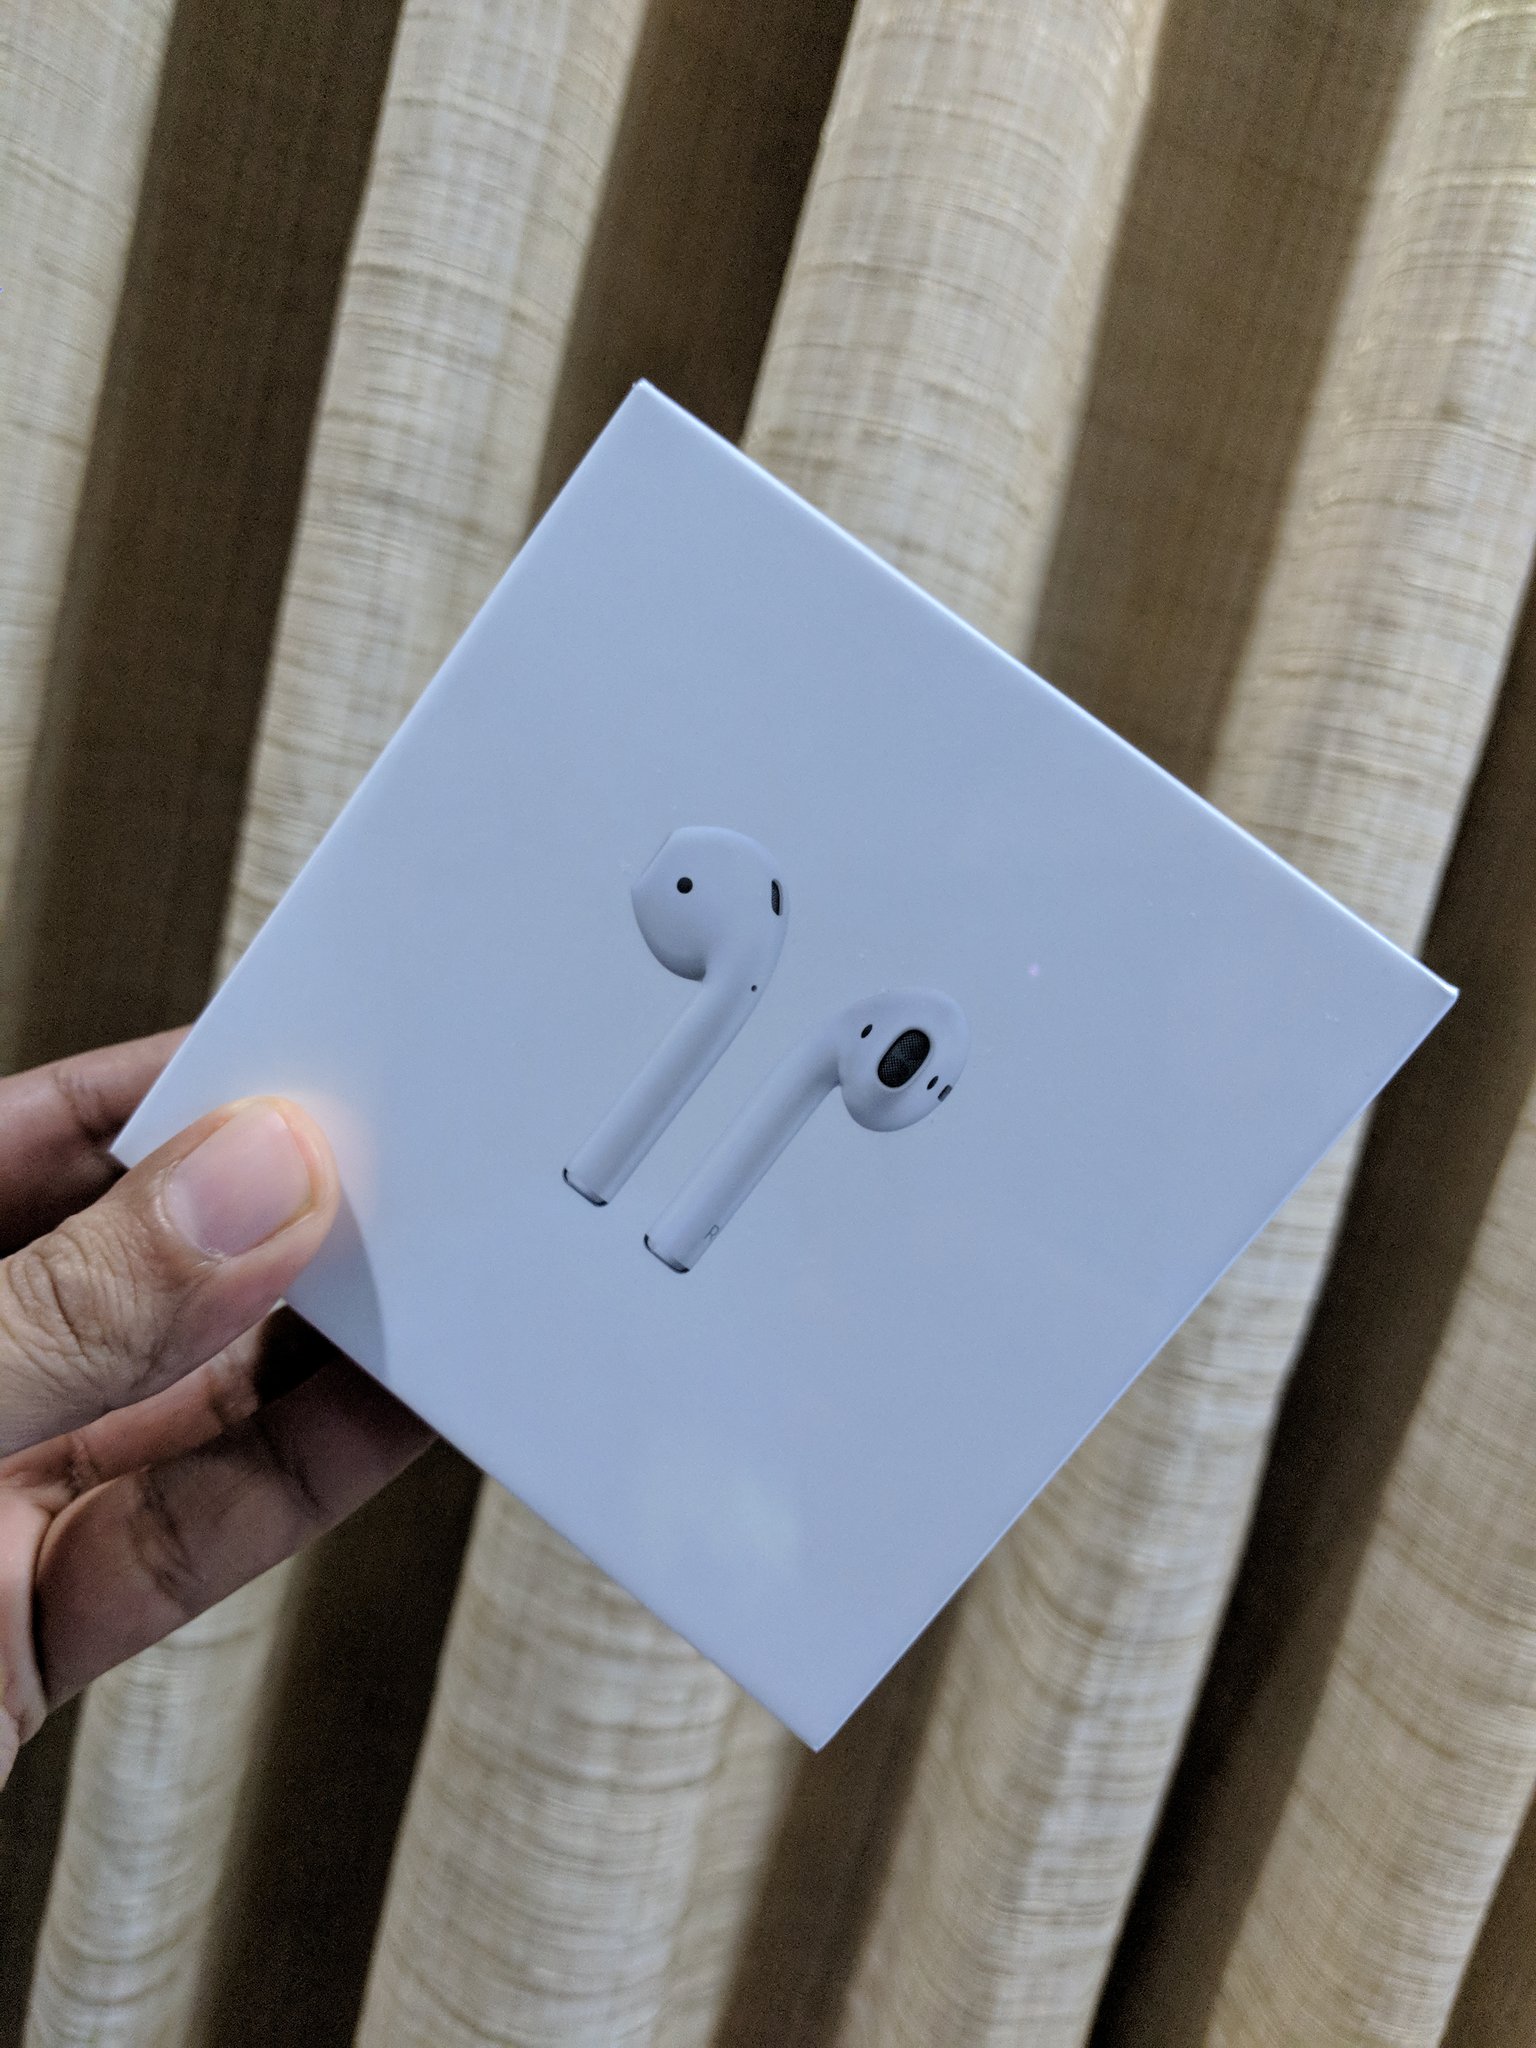 Ranjit on Twitter: "Thanks to the Pixel 2 XL and iPhone X and their lack of  headphone jack just purchase the apple airpods, let's see how good they  are. Do you guys